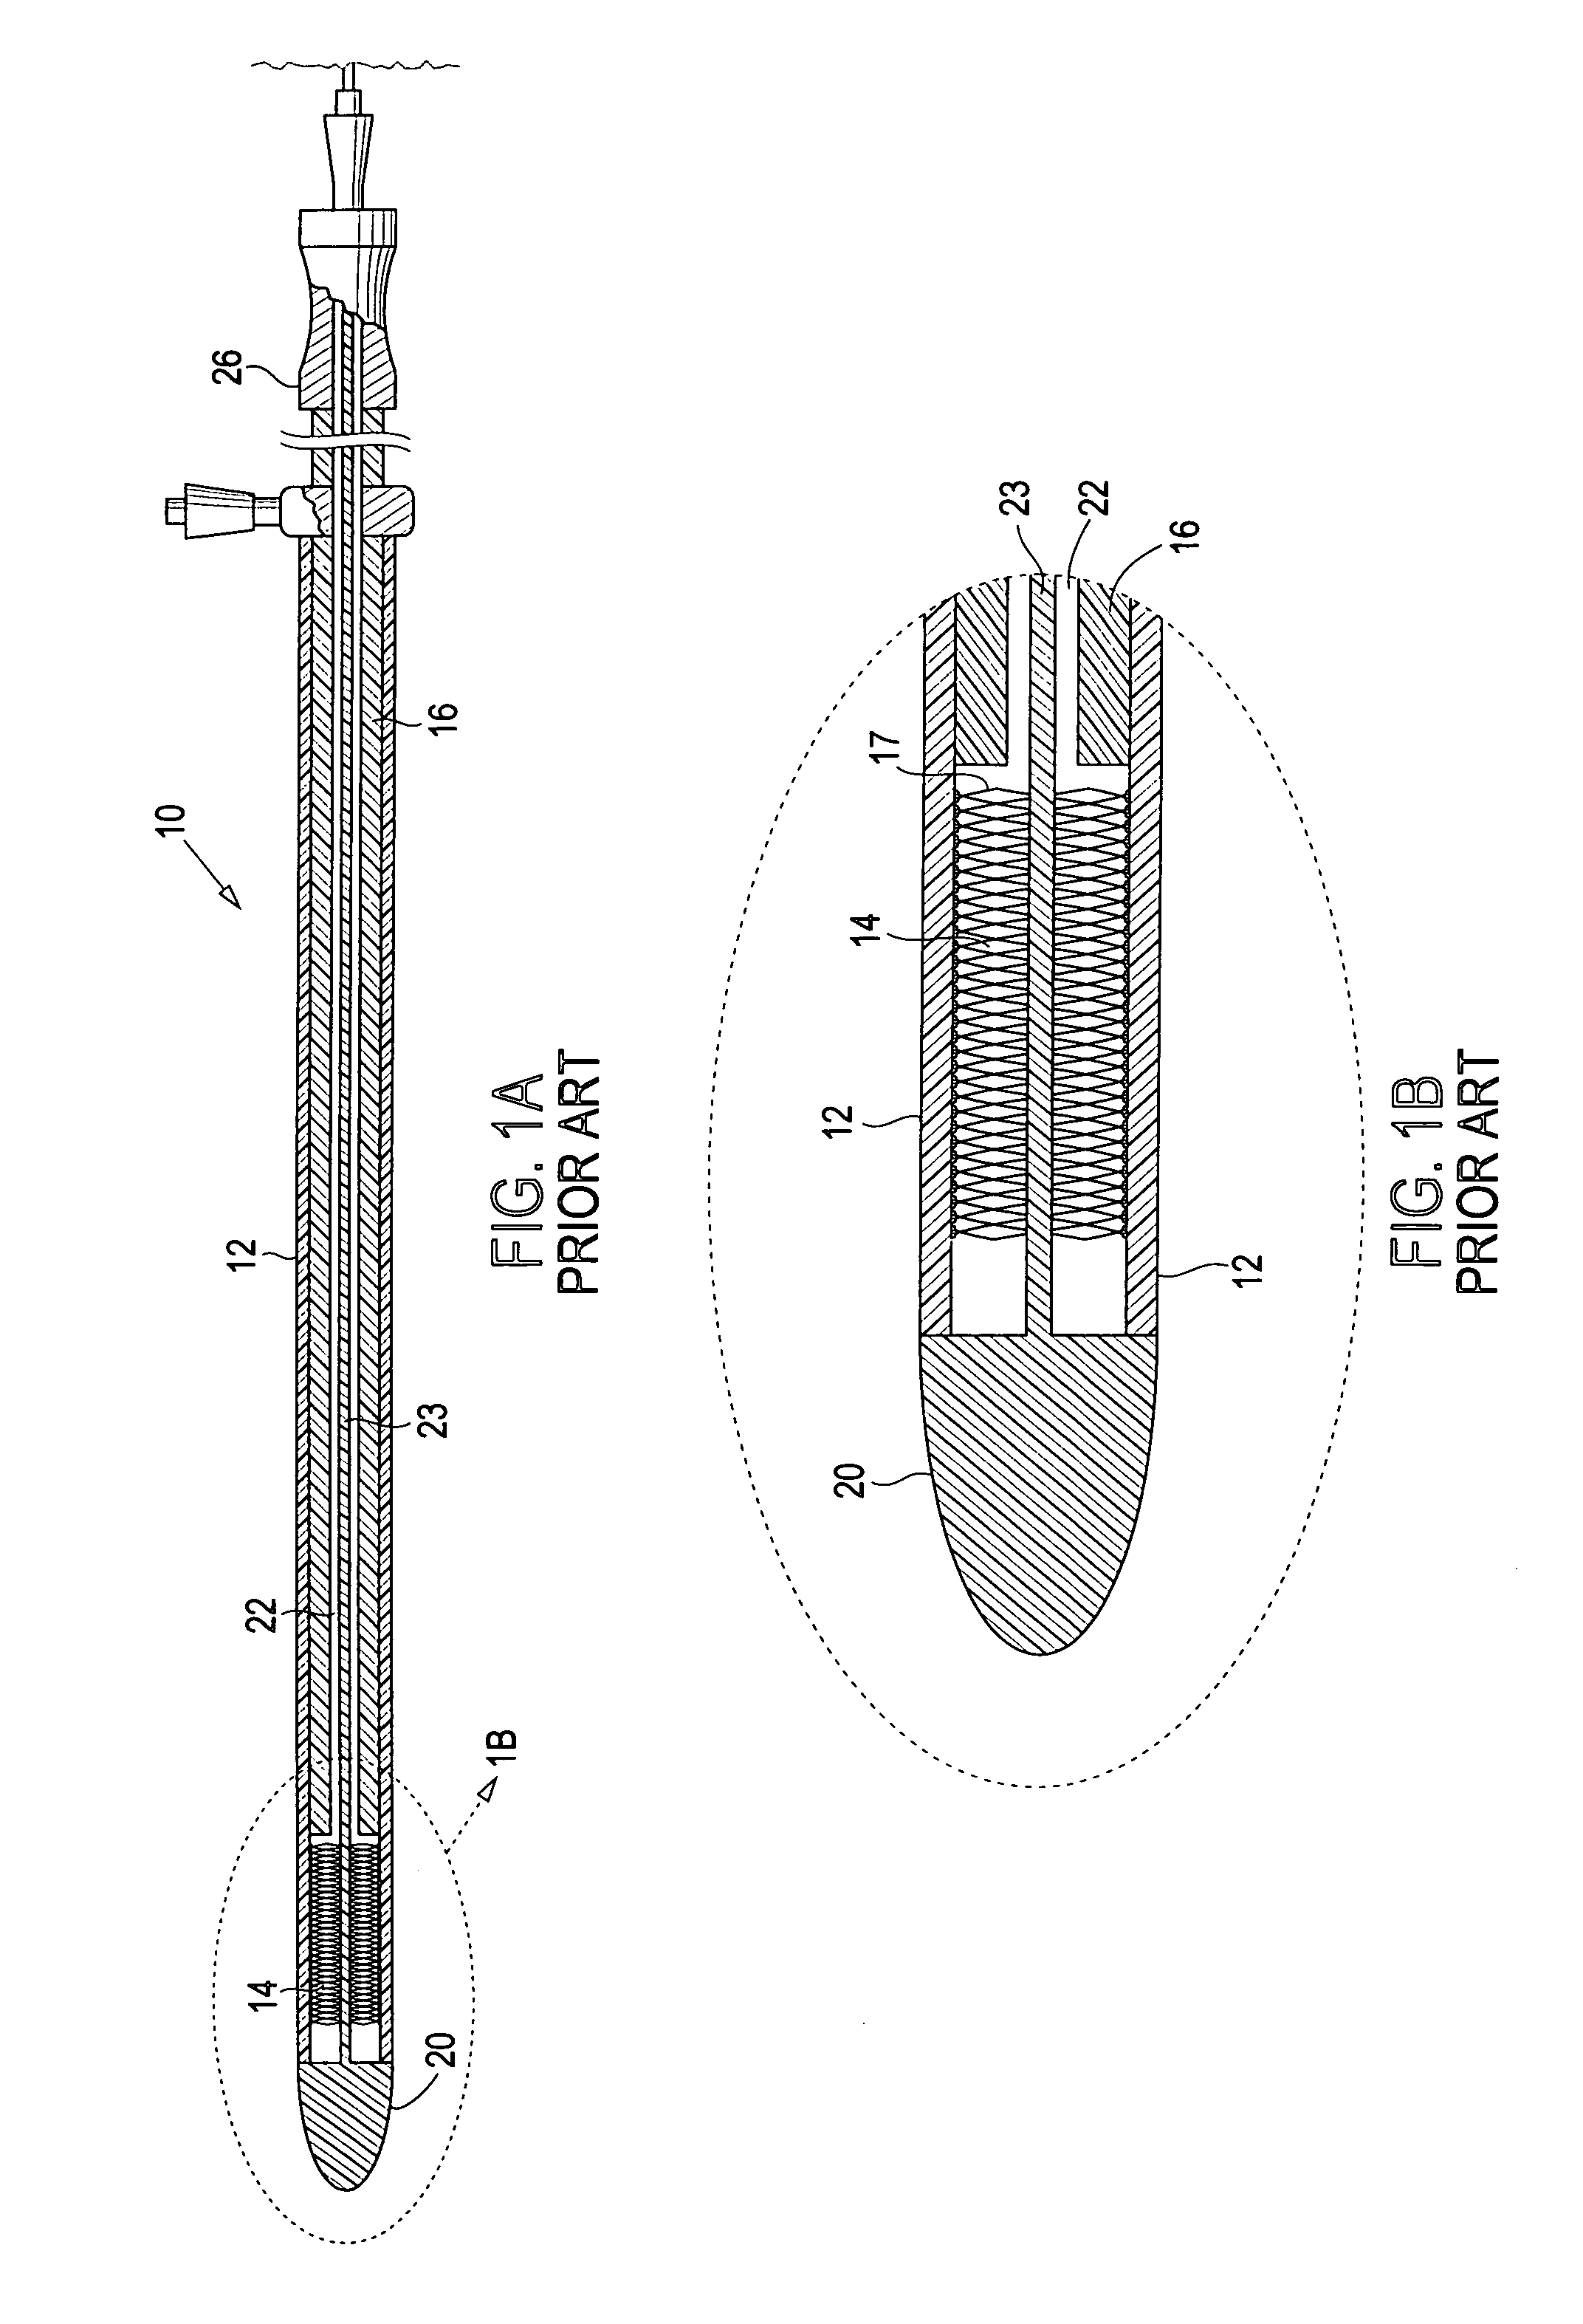 Method and apparatus for deployment of an endoluminal device